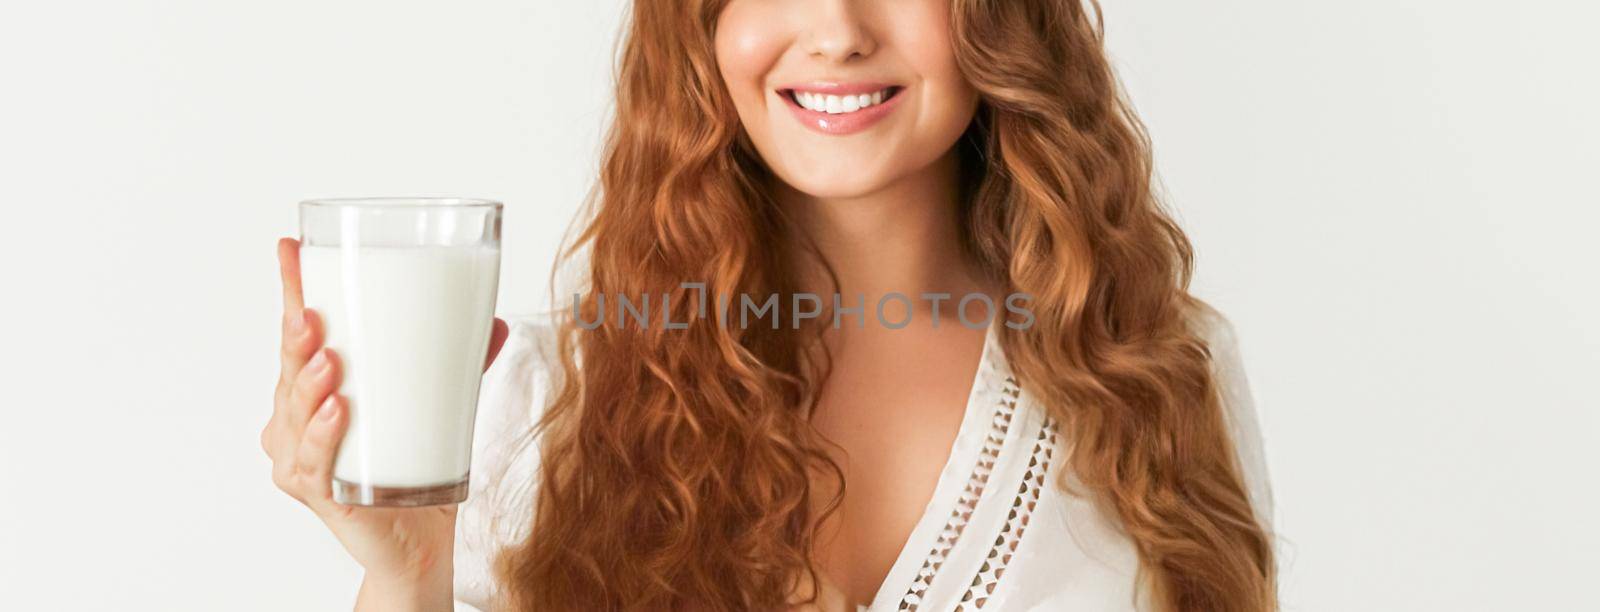 Diet, health and wellness concept, woman holding glass of milk or protein shake cocktail